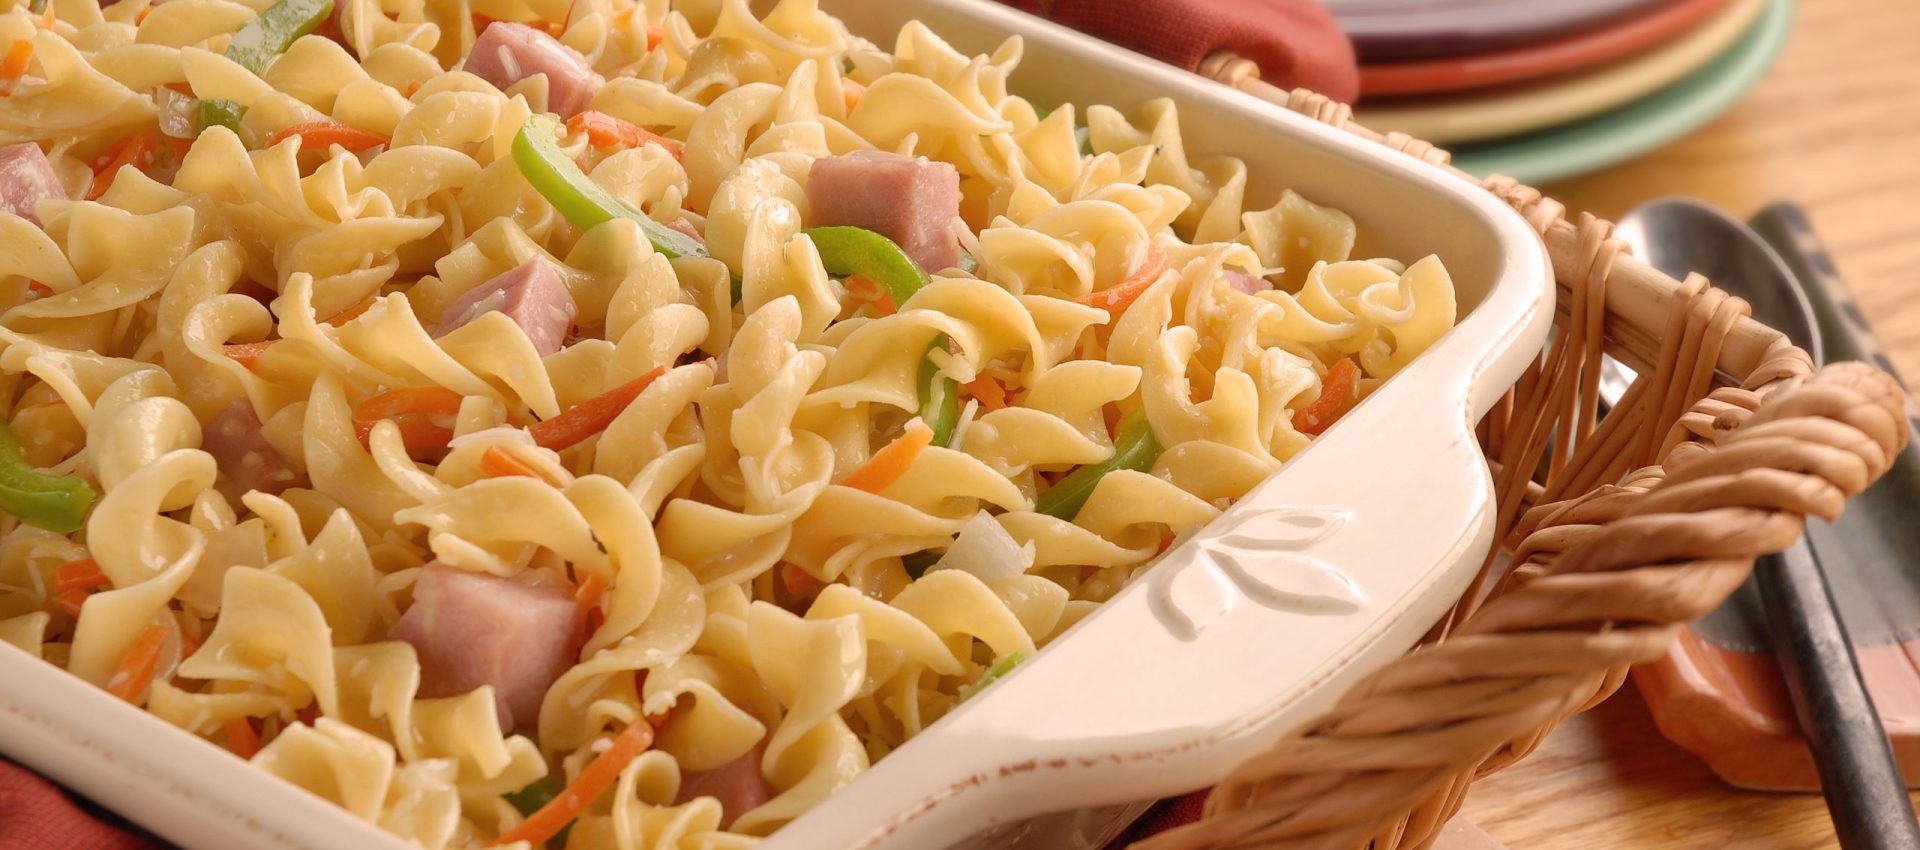 Country-Style-Ham-Noodles-scaled-1920x850 Country-Style Ham and Noodles